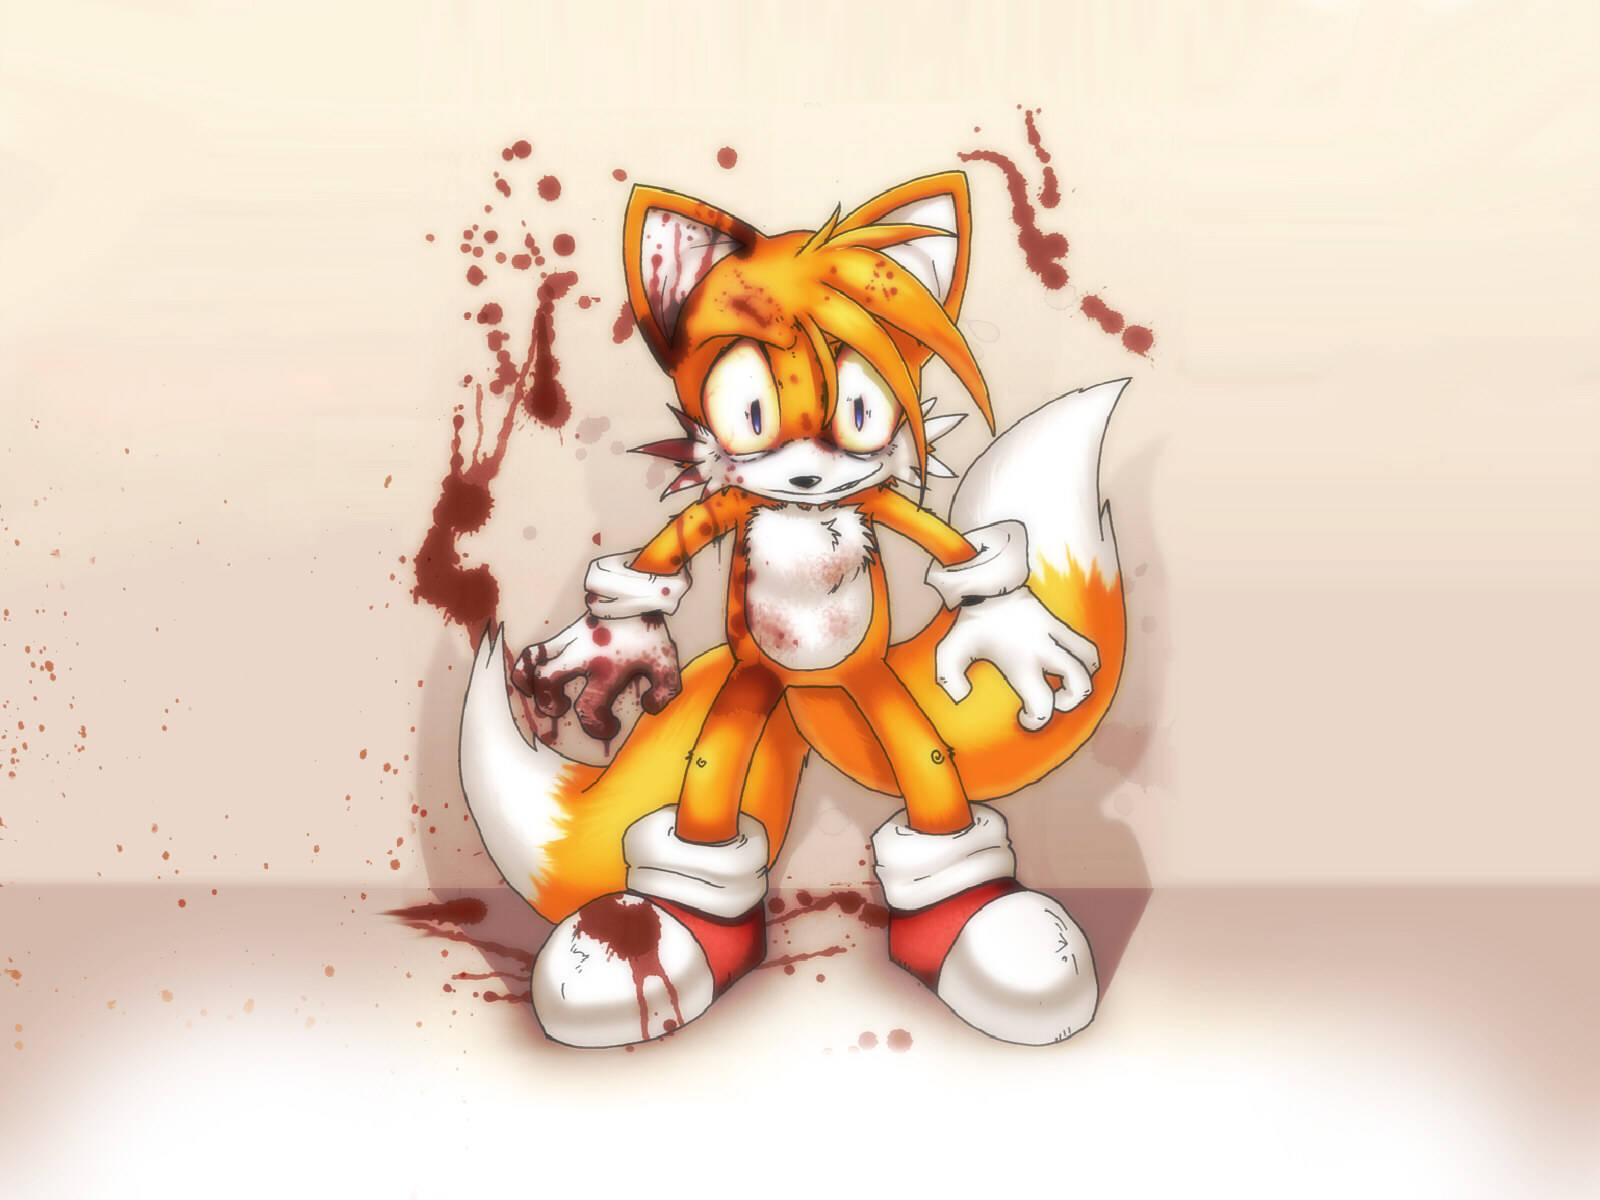 Sonic Miles Prower Aka Tails